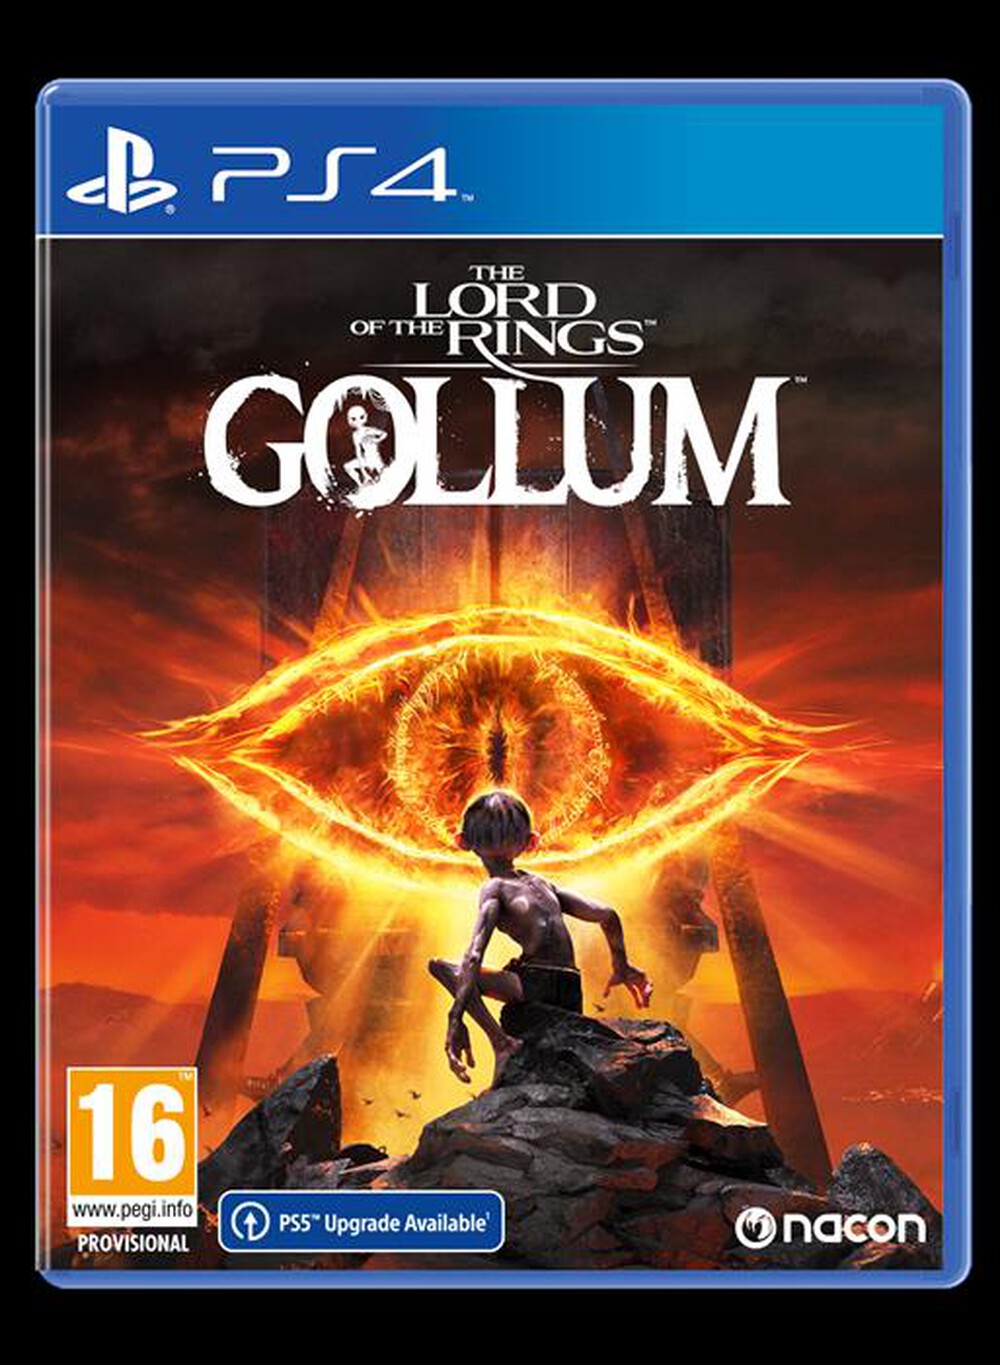 "NACON - THE LORD OF THE RINGS: GOLLUM PS4"